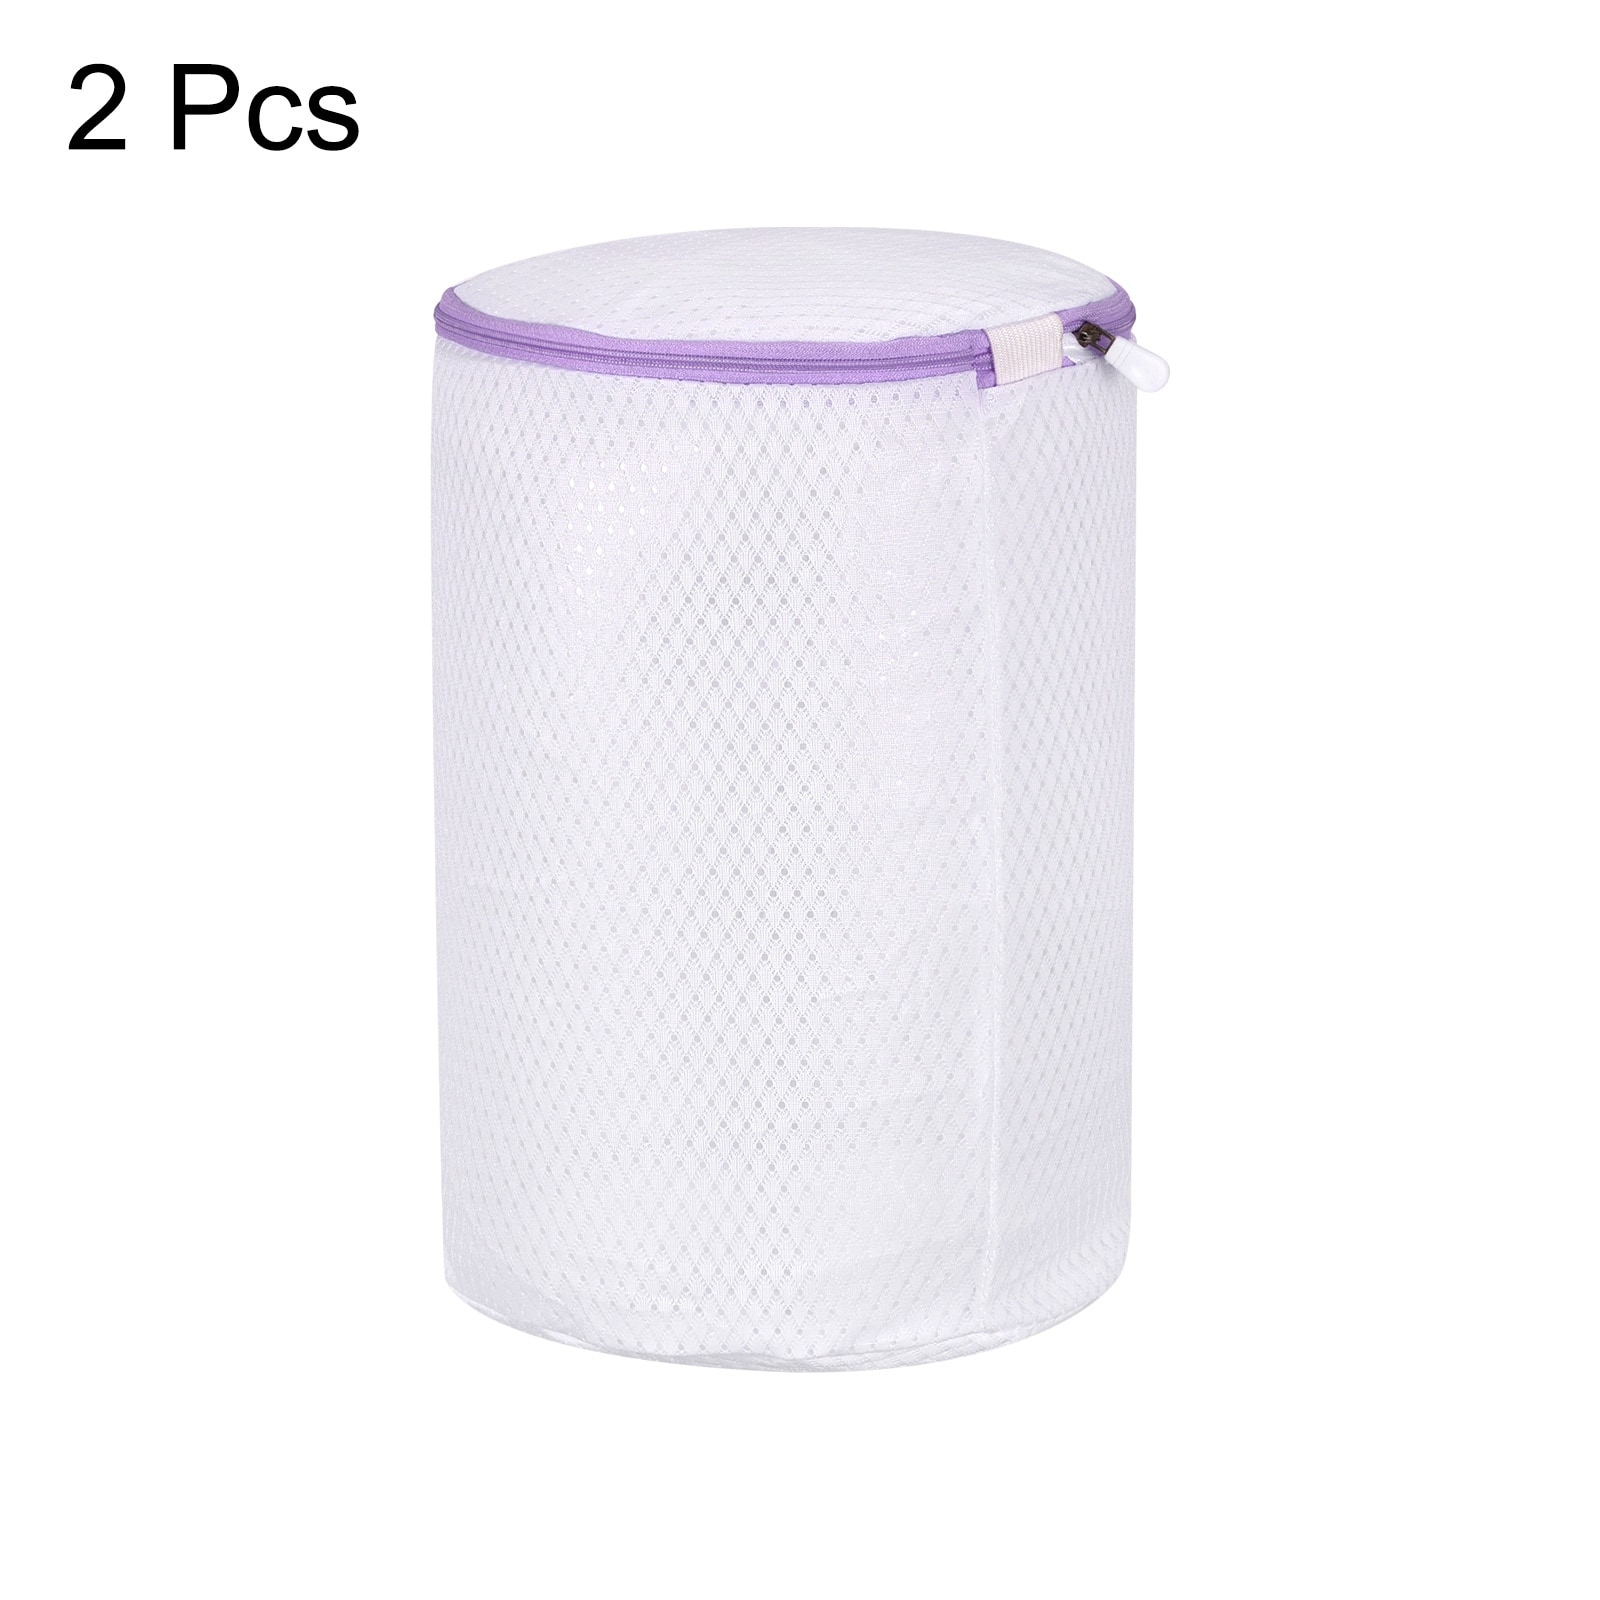 https://ak1.ostkcdn.com/images/products/is/images/direct/45c3ef8c577ff9bf70d6b646e69425b5e1345224/2Pcs-7.9x15Inch-Cylinder-Mesh-Laundry-Bags-Shoe-Washing-Bag%2C-White-Purple.jpg